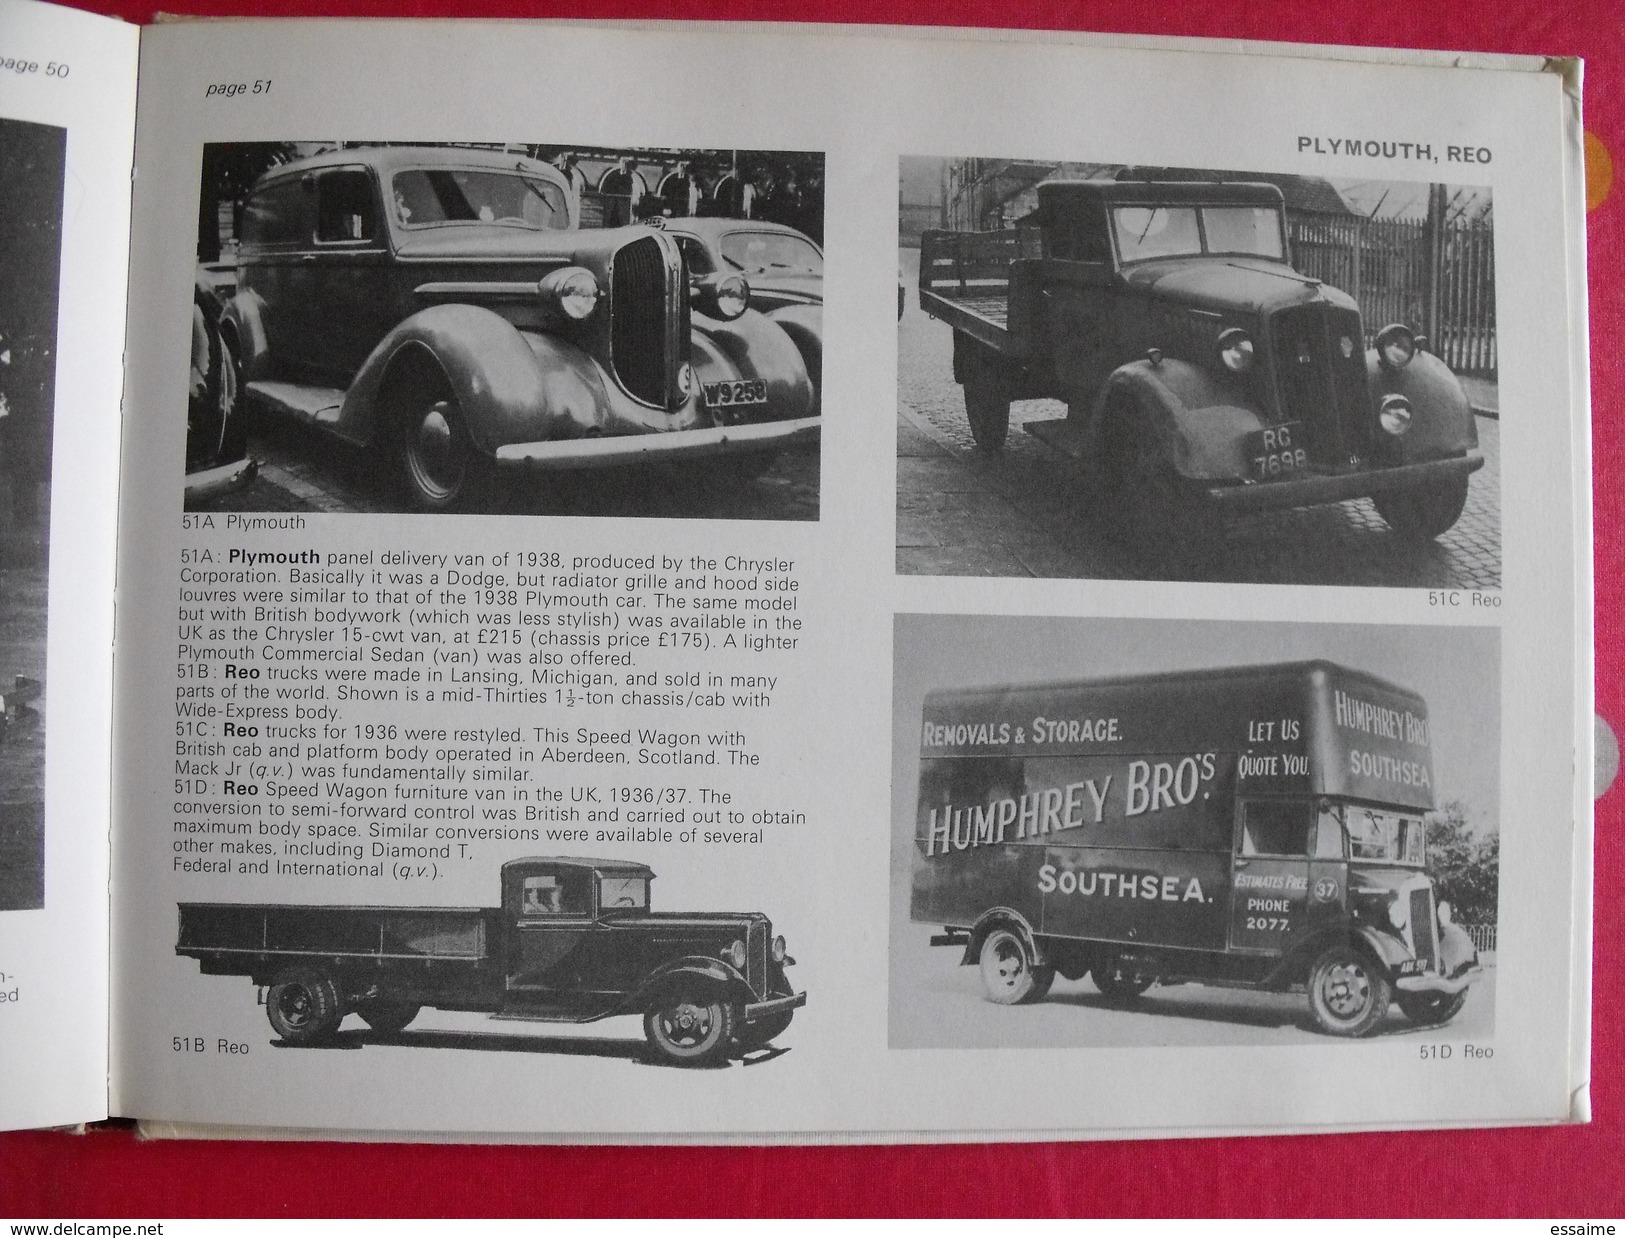 american trucks of the late thirties. 1935-1939. camions des années 1930. Warne 1975